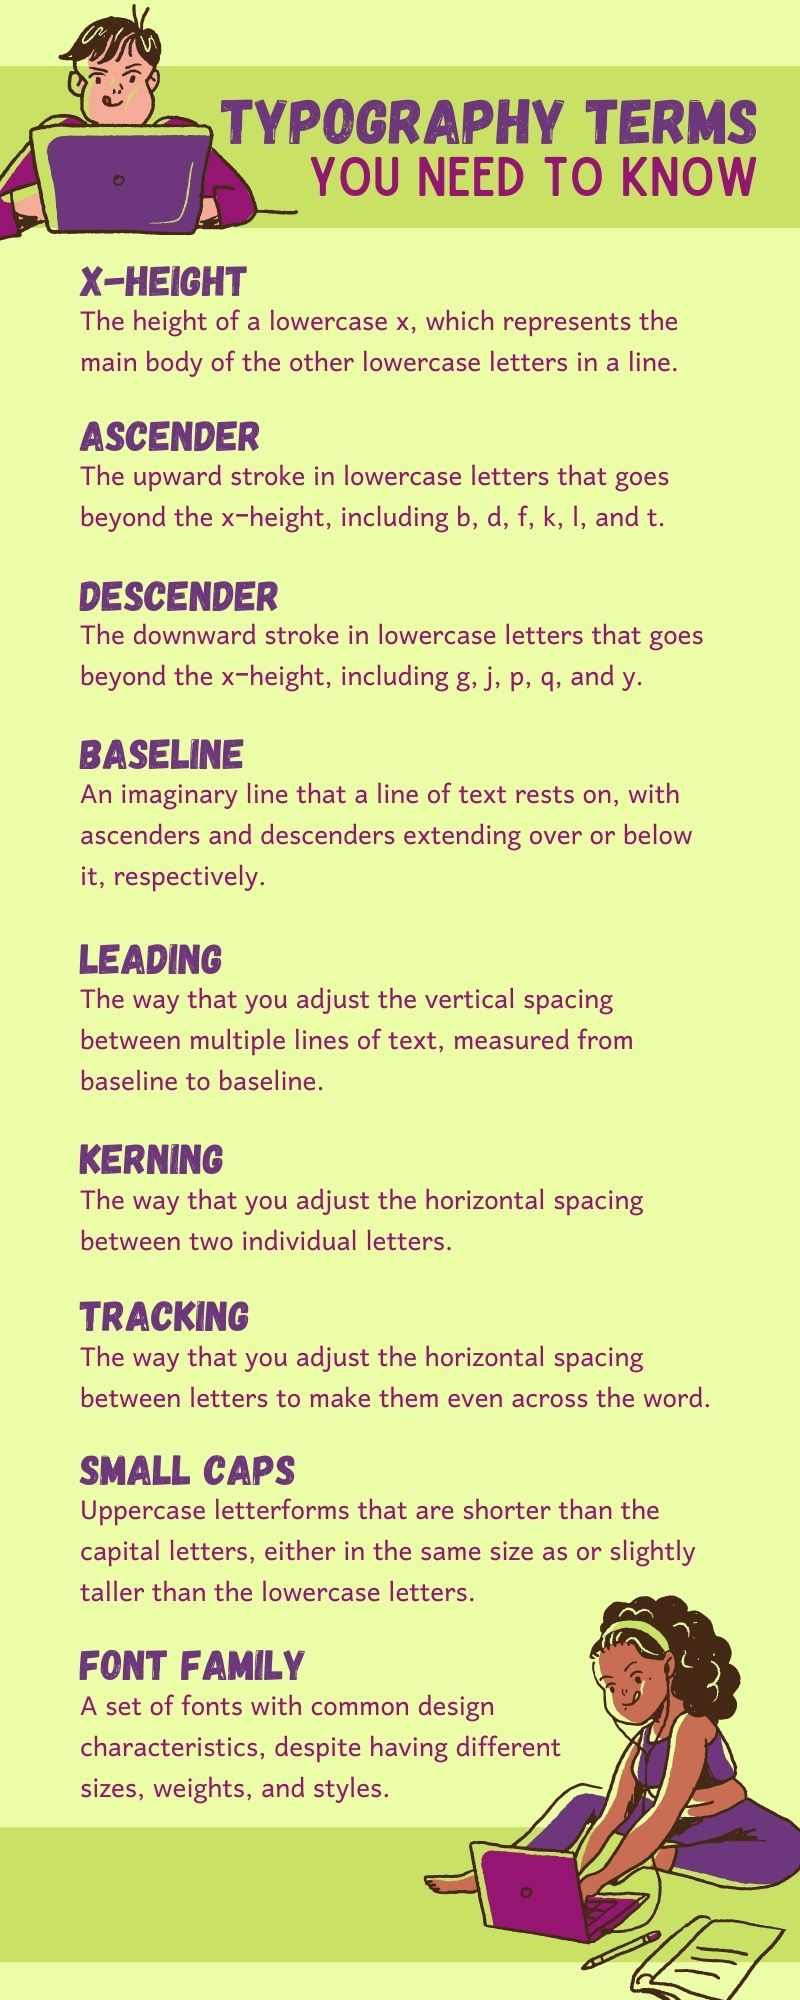 Typography Terms You Need to Know